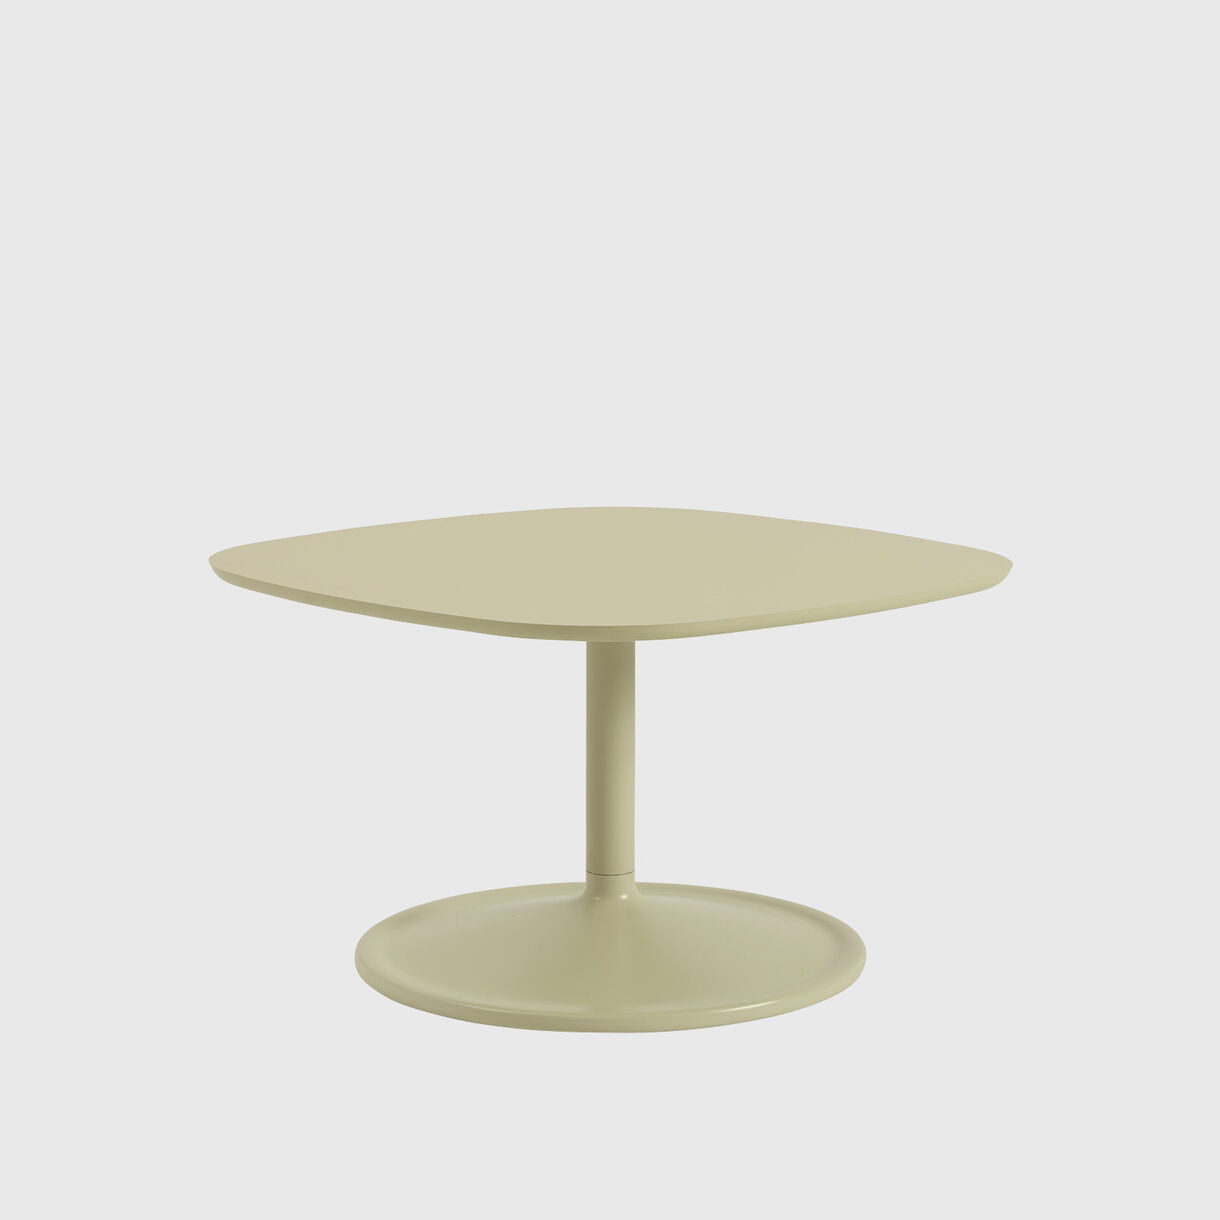 Soft Coffee Table, Square, Beige Green